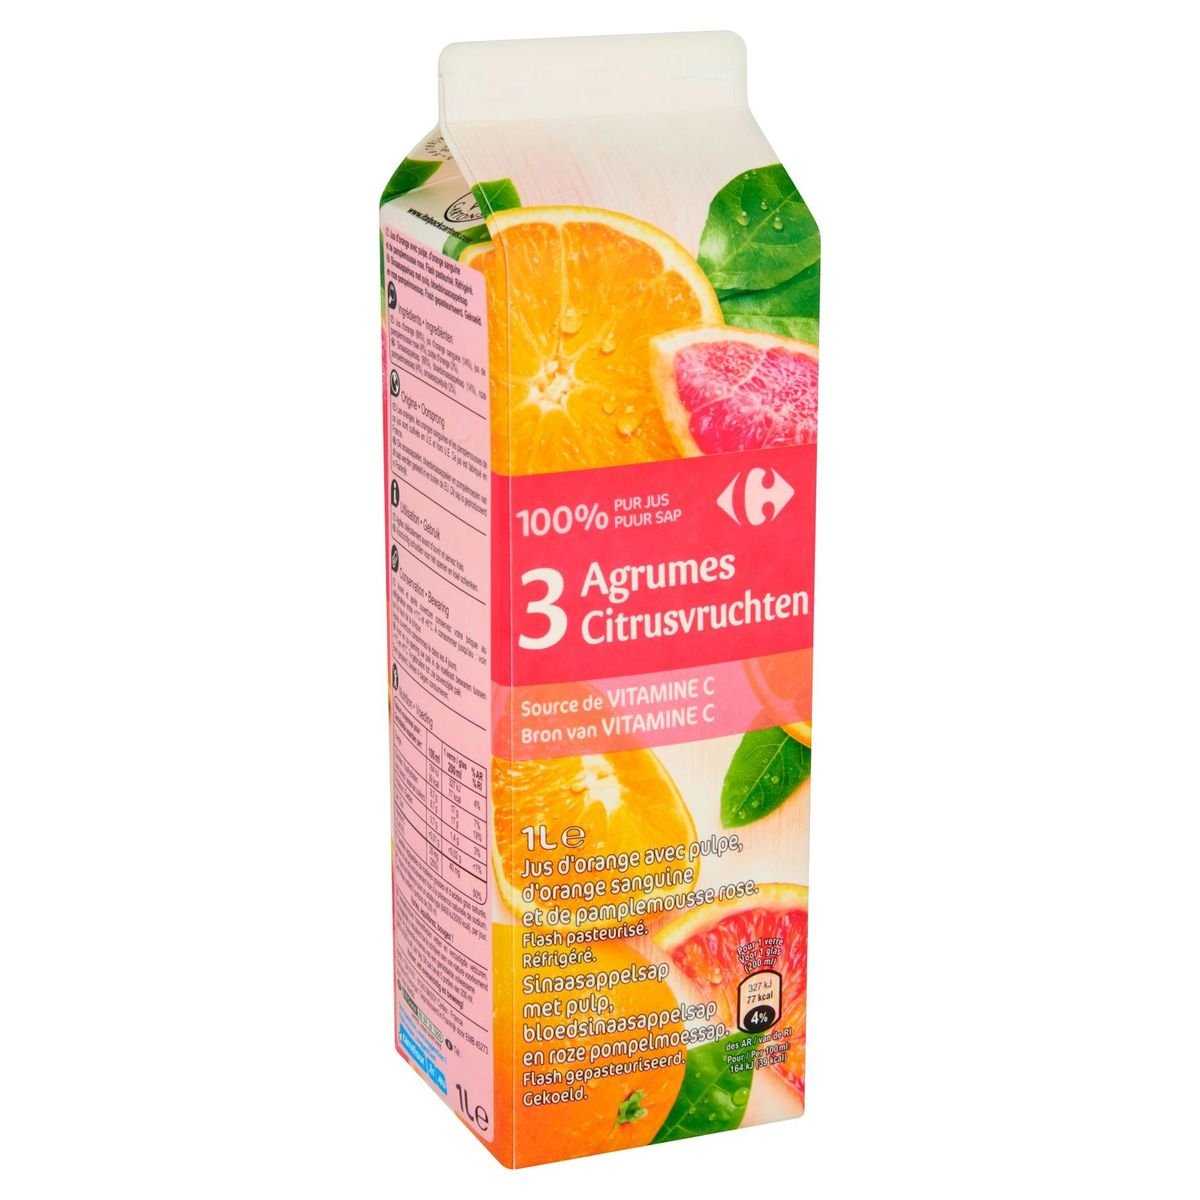 Carrefour 100% Pur Jus 3 Agrumes 1 L